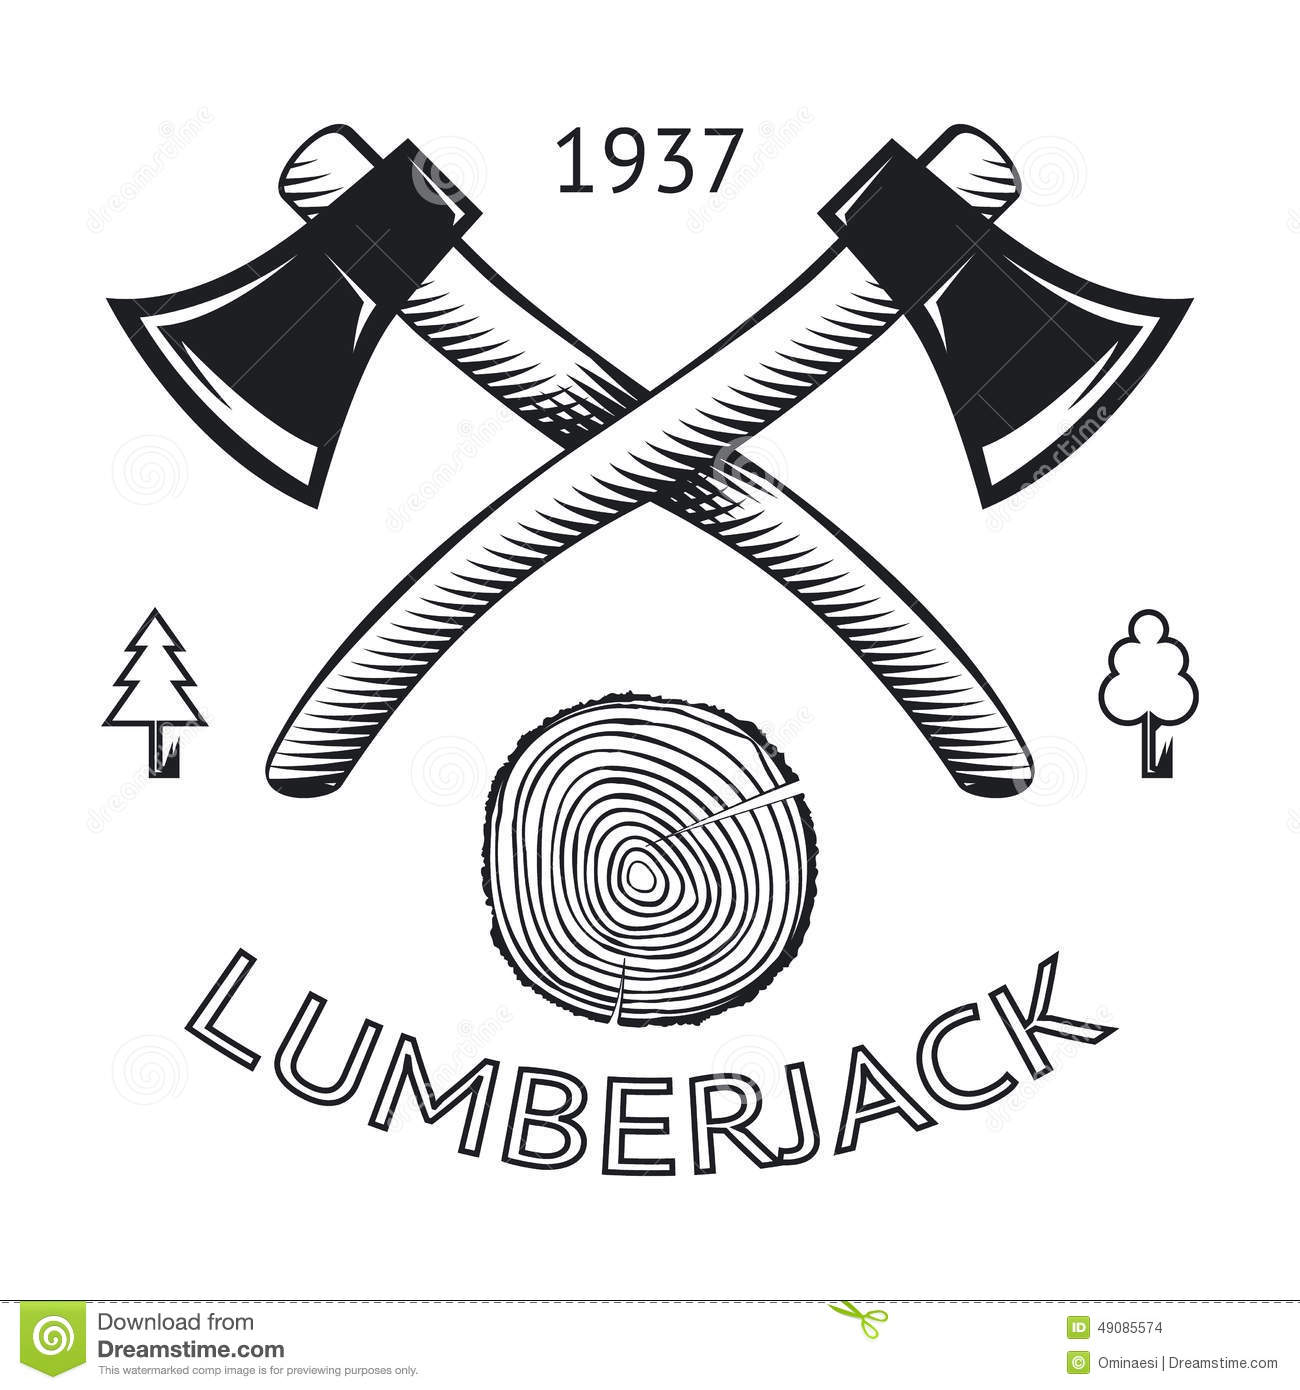 Lumberjack Clipart Pictures.